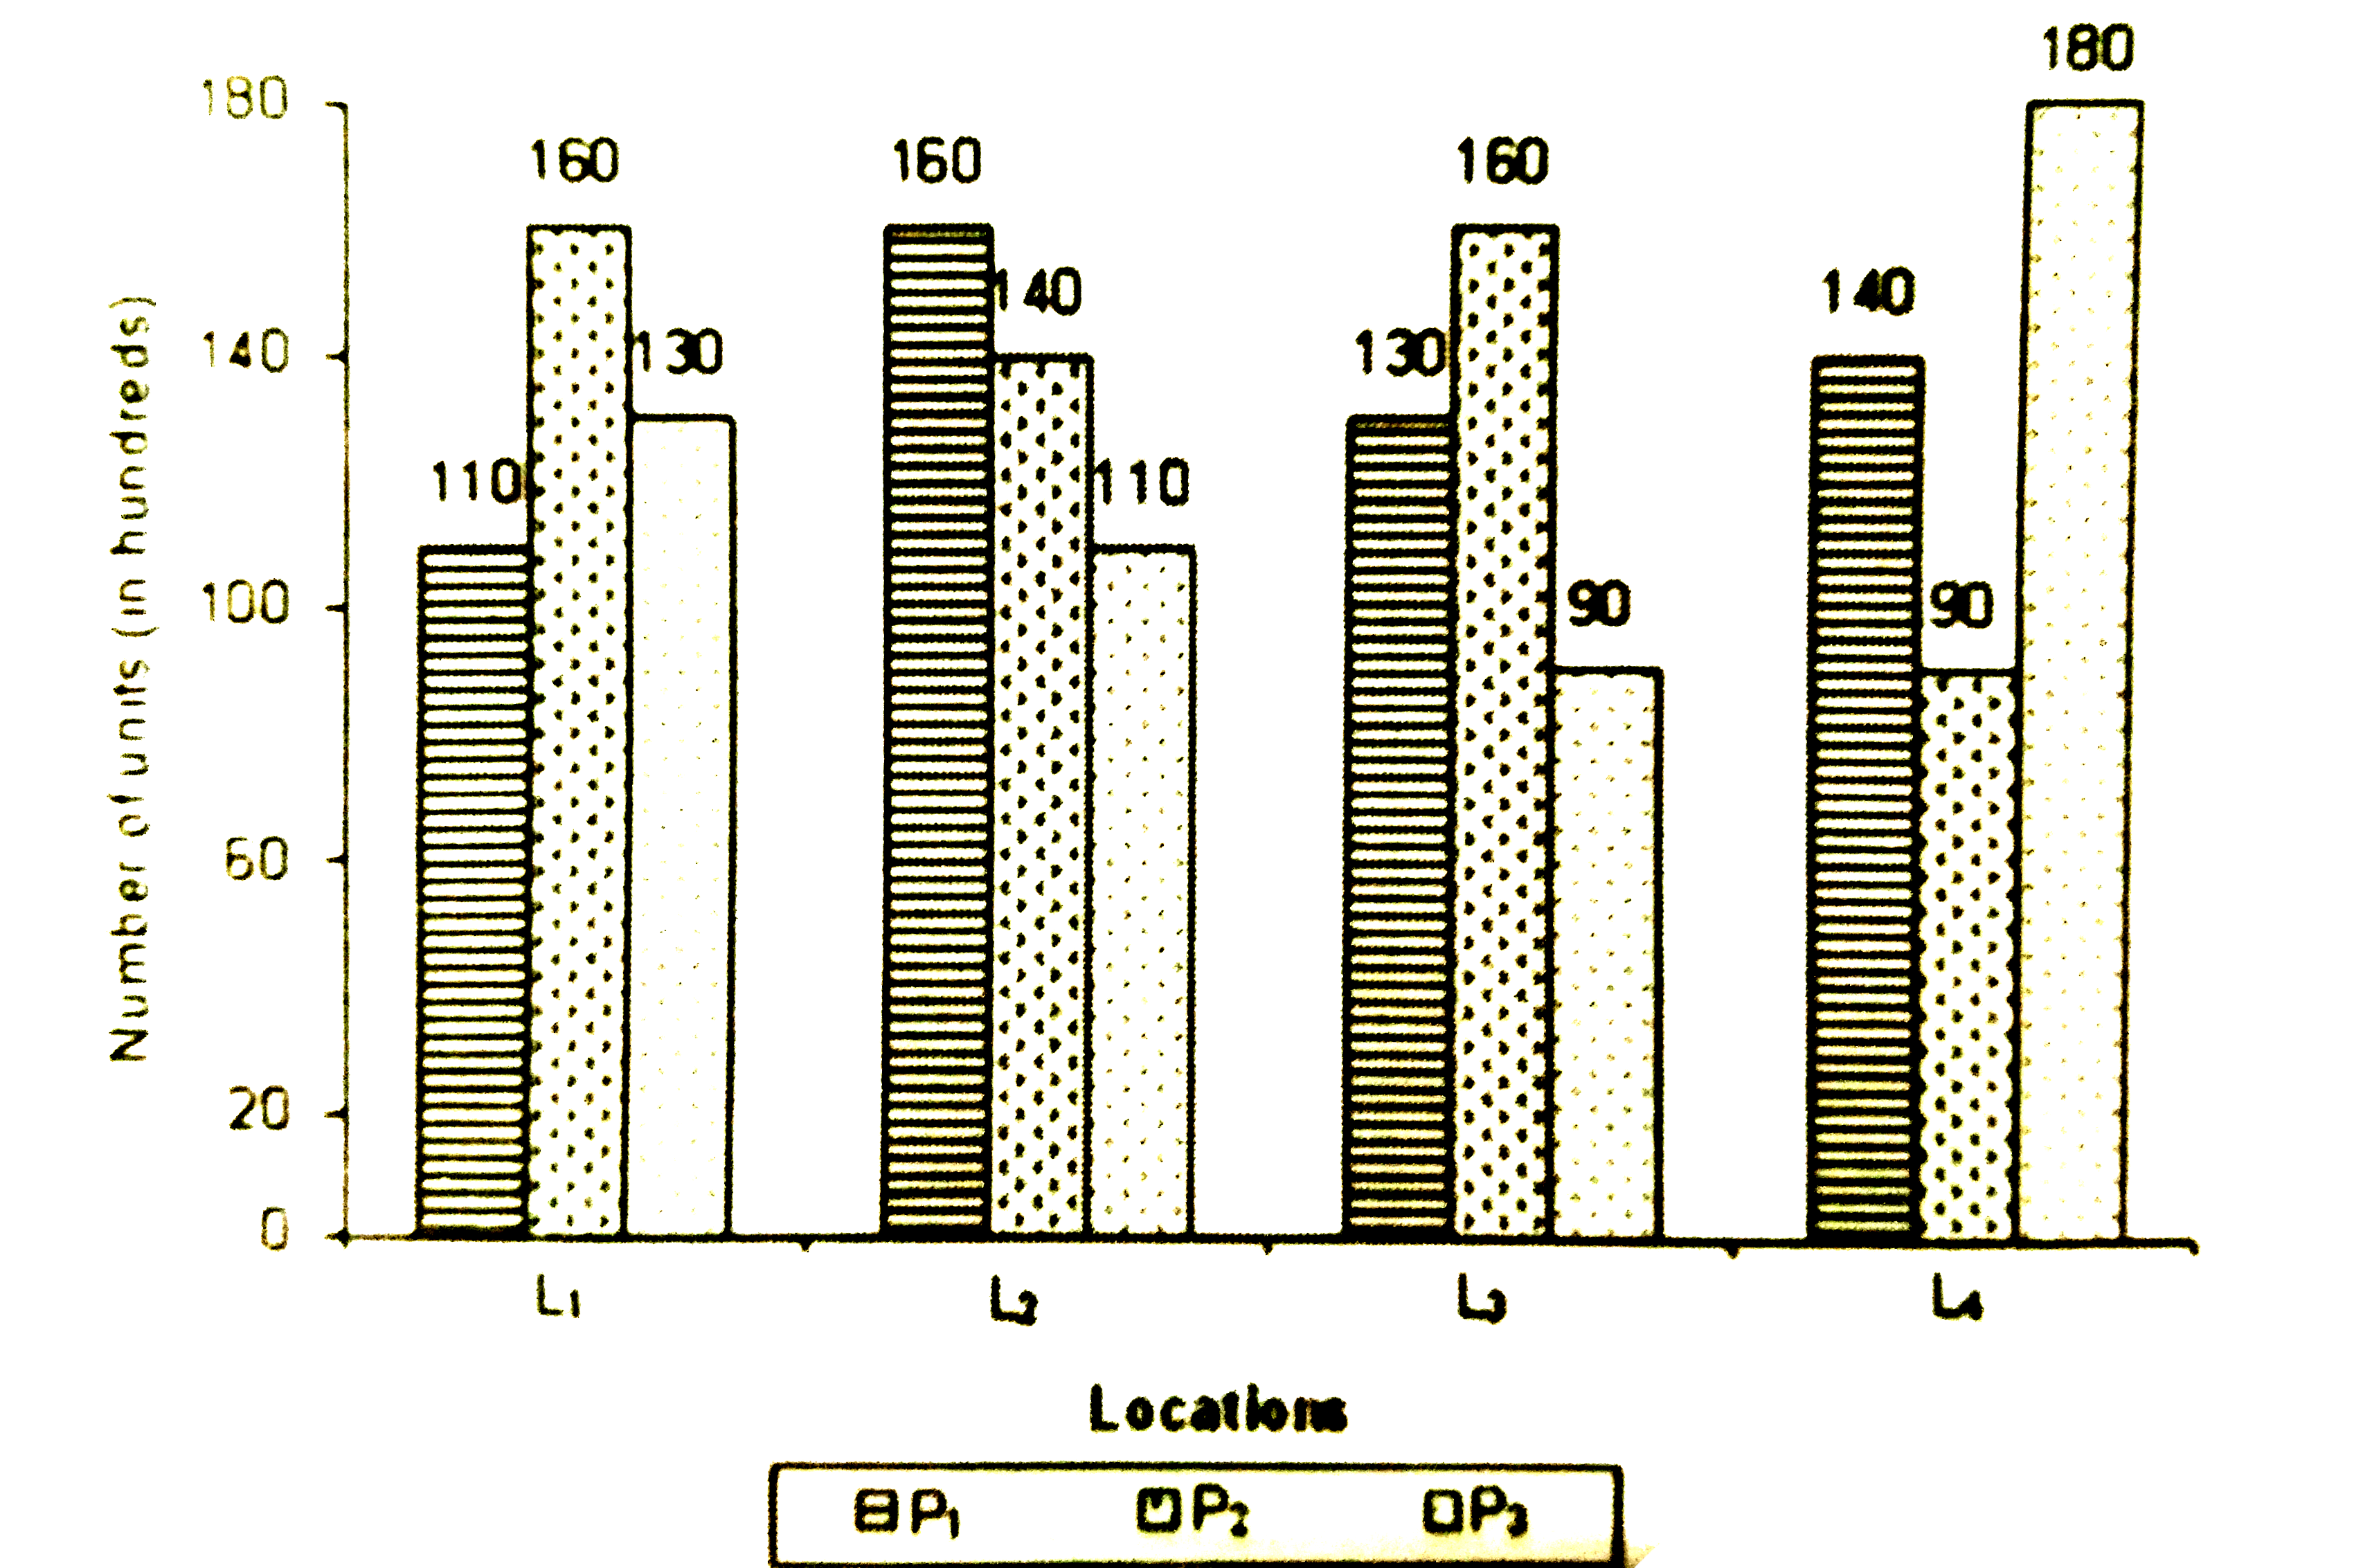 Number of units of three different products P(1),P(2) and P(3) produced (nits in hundreds) at four different locations (L(1),L(2)=L(3) and L(4))      In which location is the maximum number of units produced ?